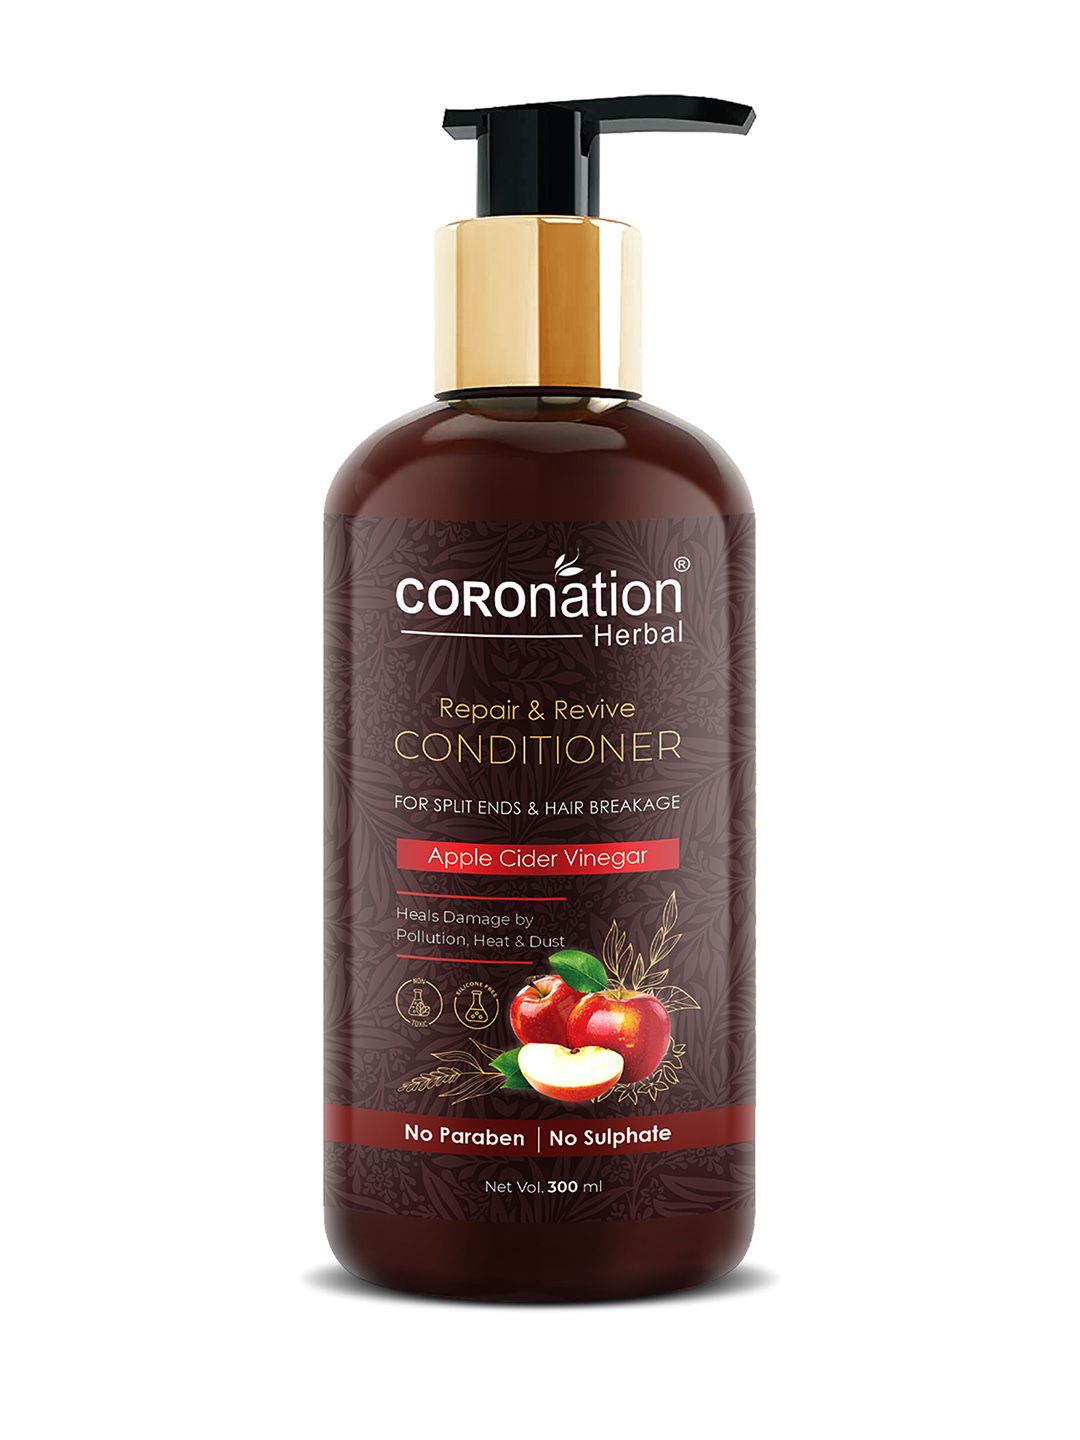 COROnation Herbal Repair & Revive Hair Conditioner with Apple Cider Vinegar 300 ml Price in India